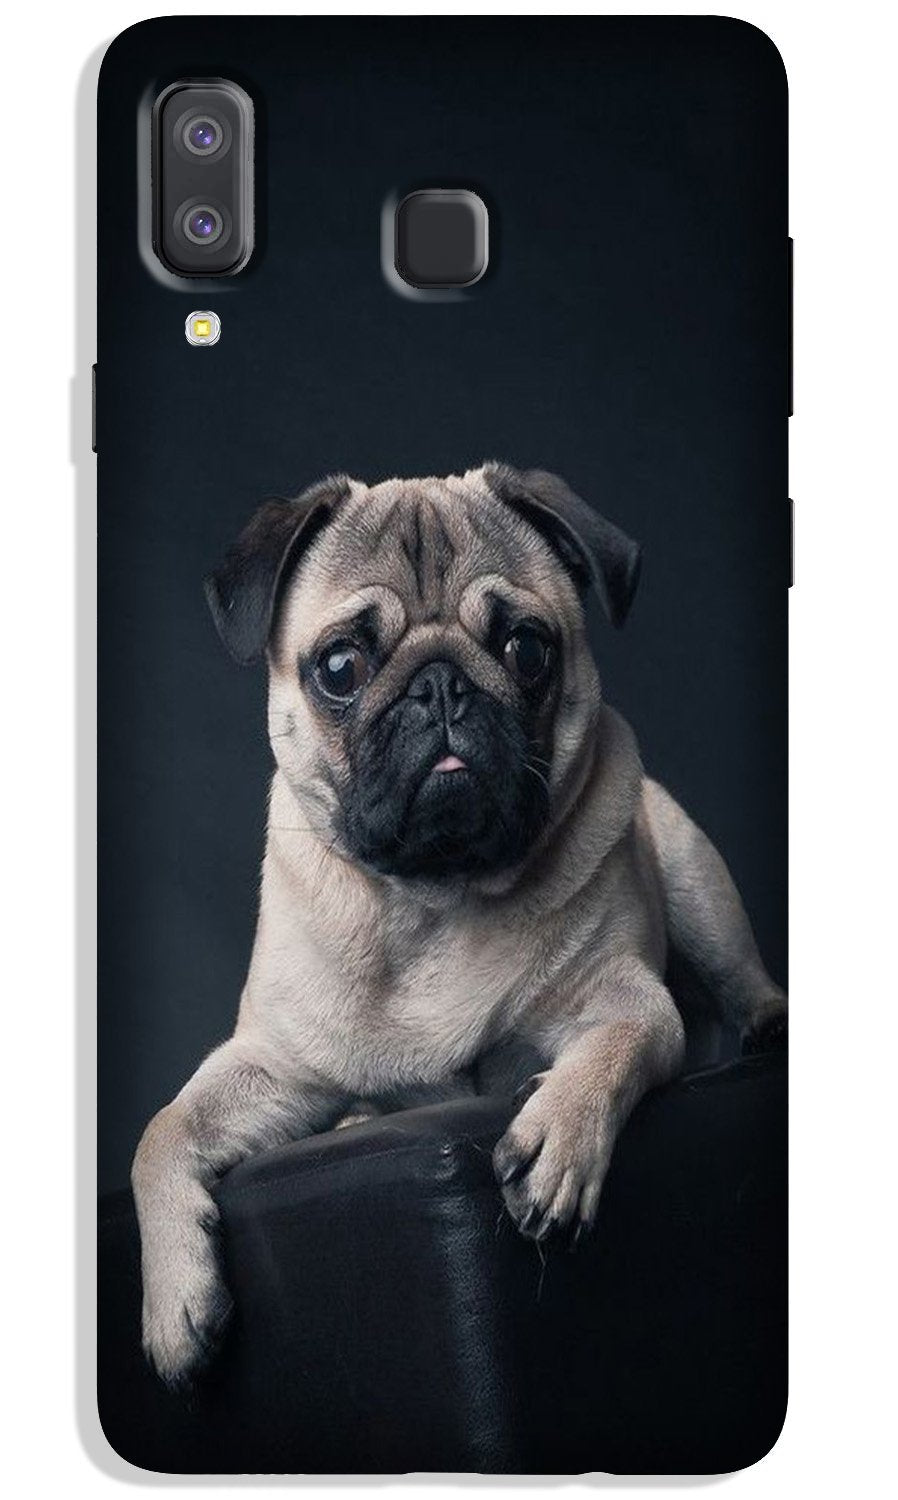 little Puppy Case for Galaxy A8 Star